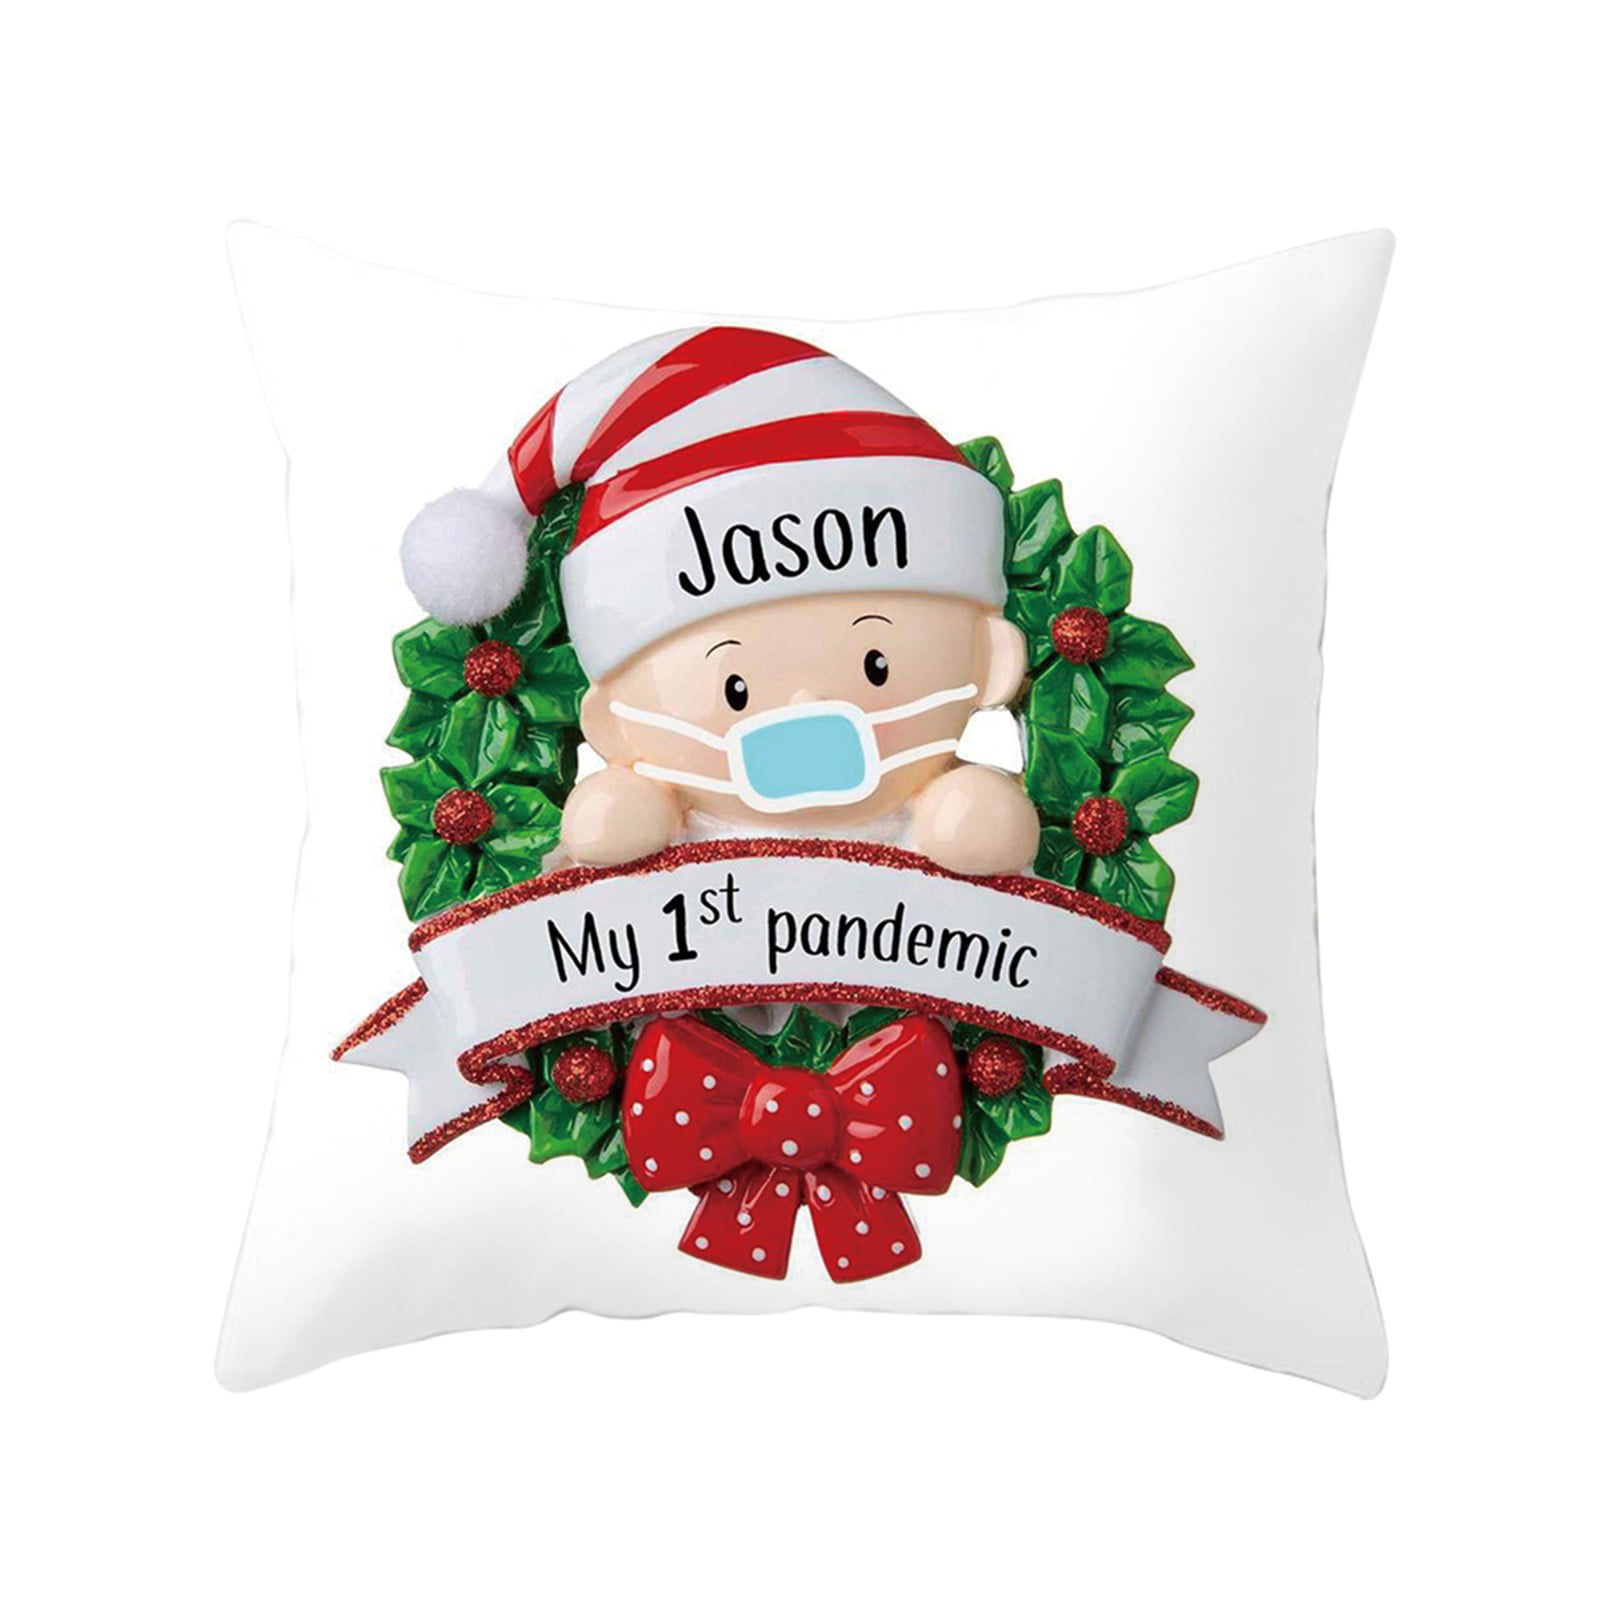 JASEN Farmhouse Christmas Pillow Covers 18x18 Set of 4 Rustic Winter Holiday Xmas Decor Throw Pillows Christmas Decorations Cushion Cases